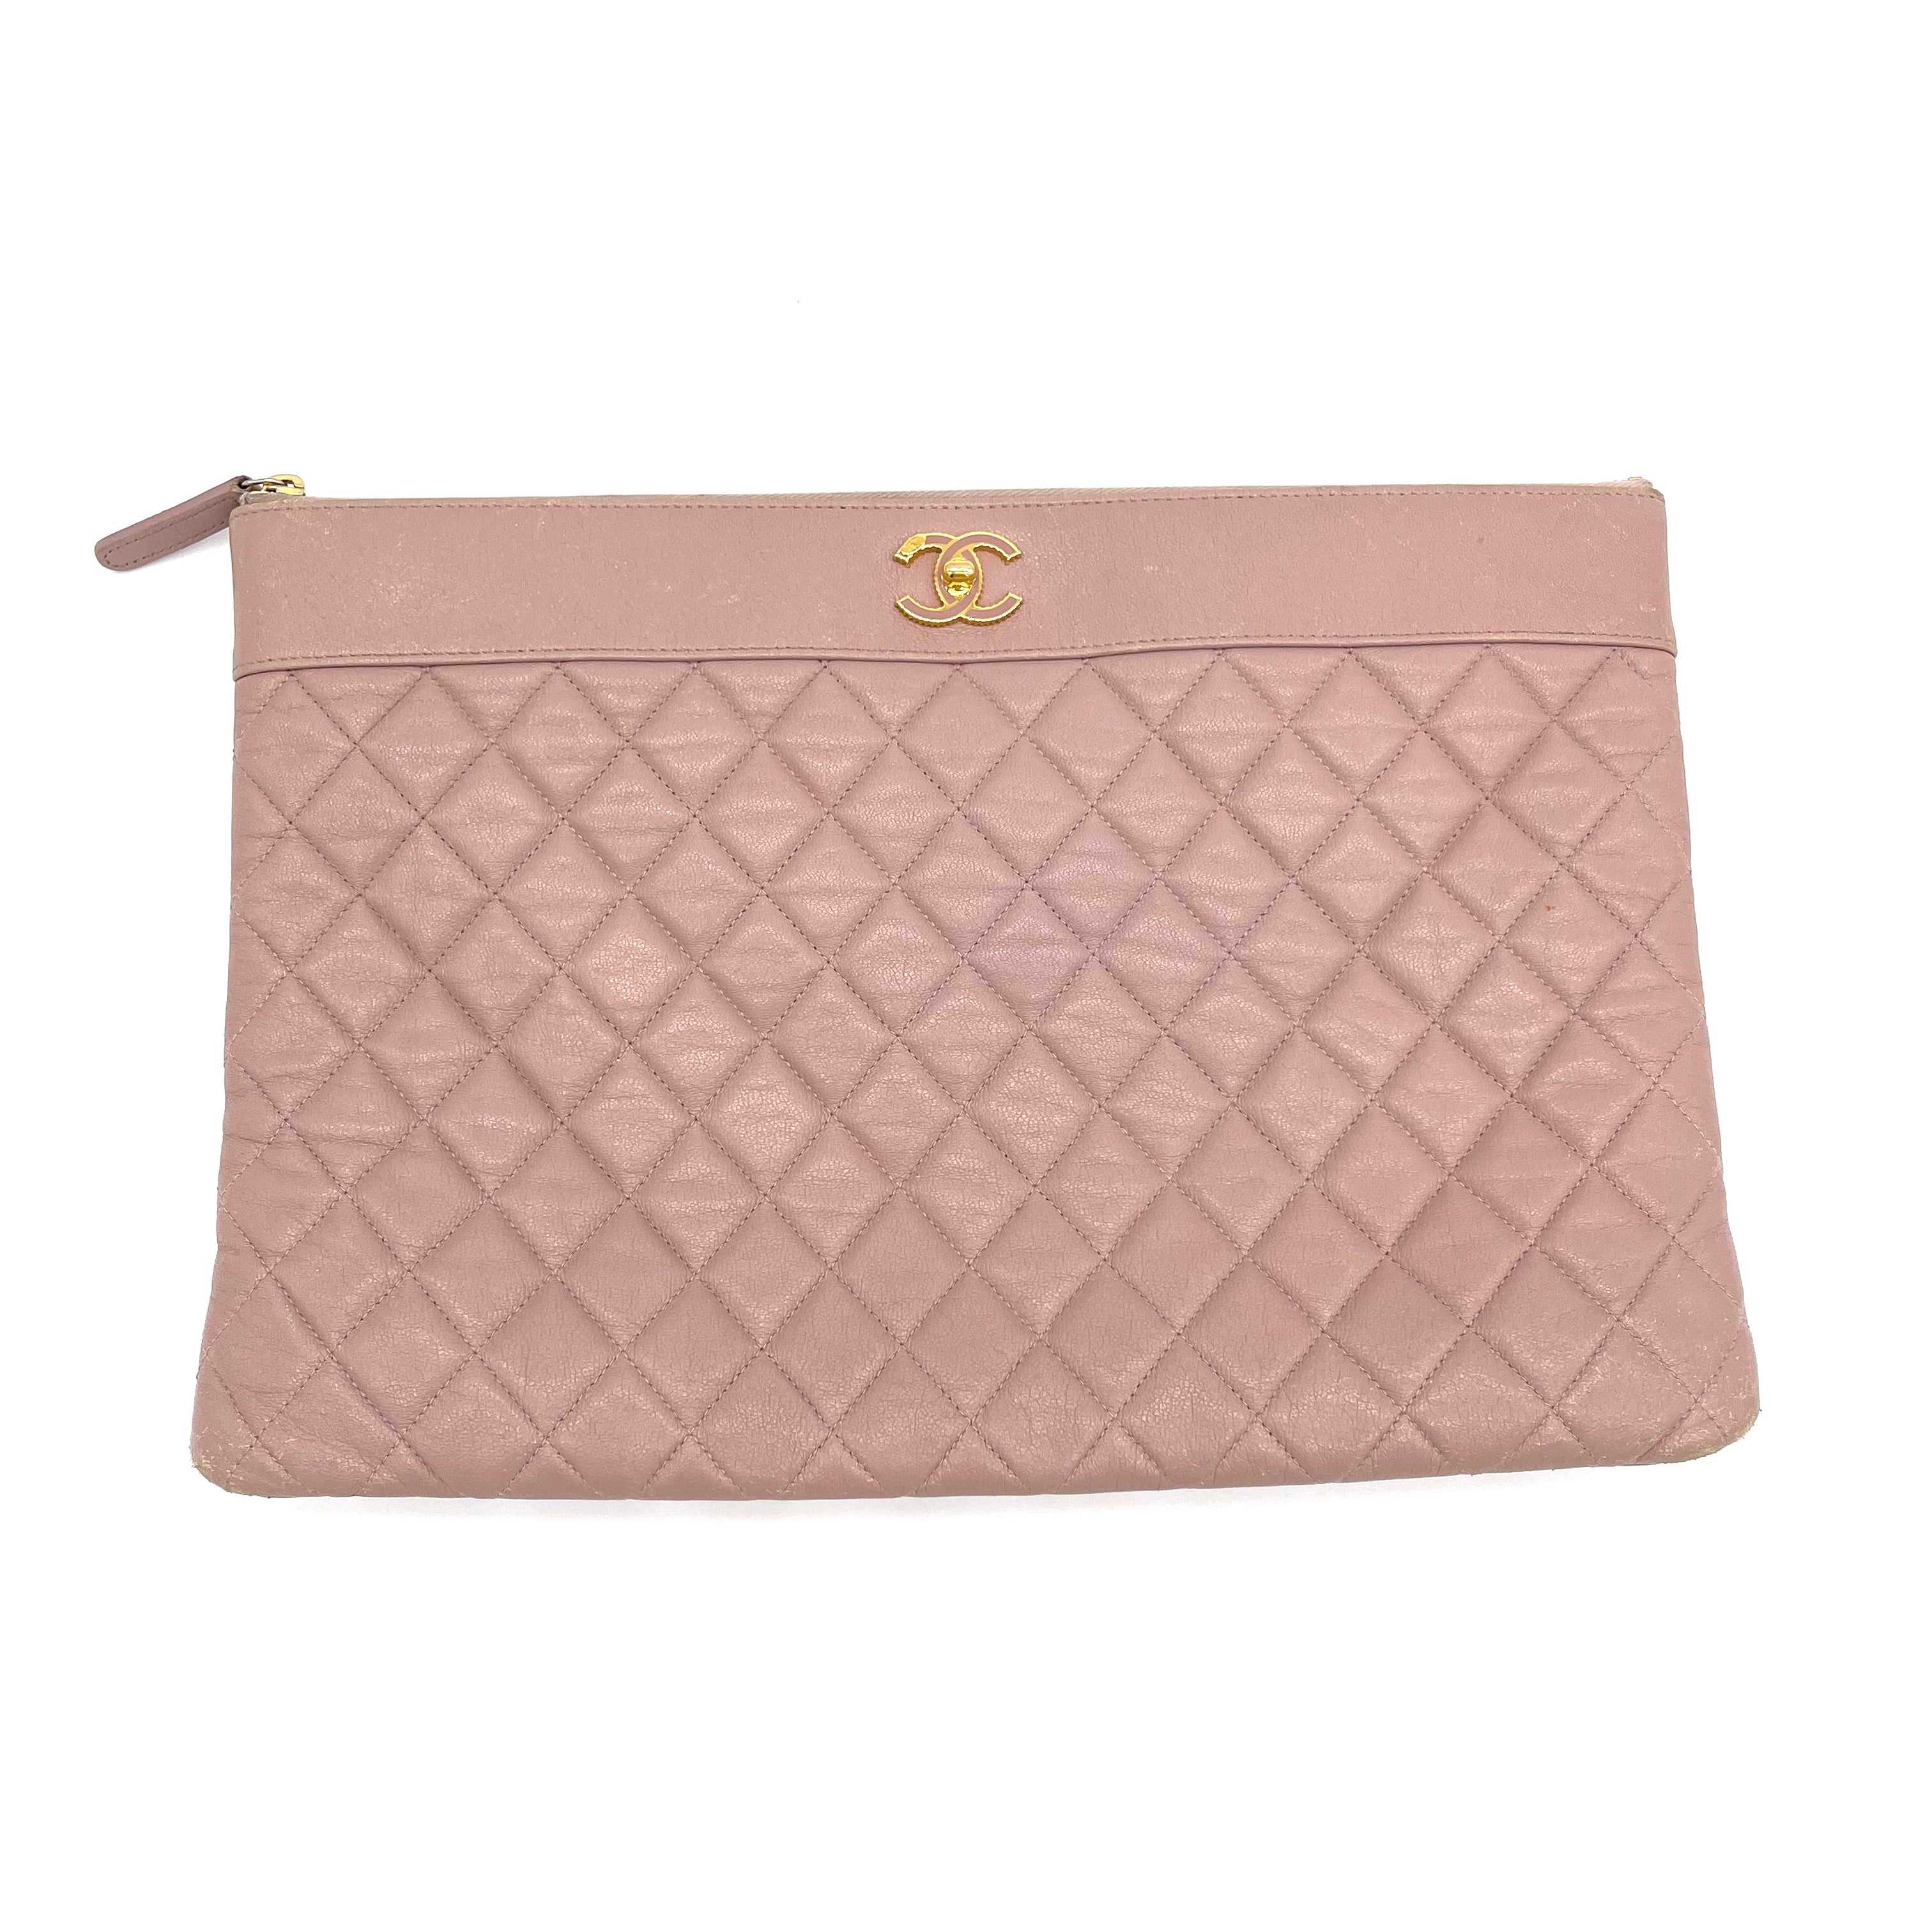 Chanel Mademoiselle Vintage Flap Bag Quilted Sheepskin Small For Sale at  1stDibs